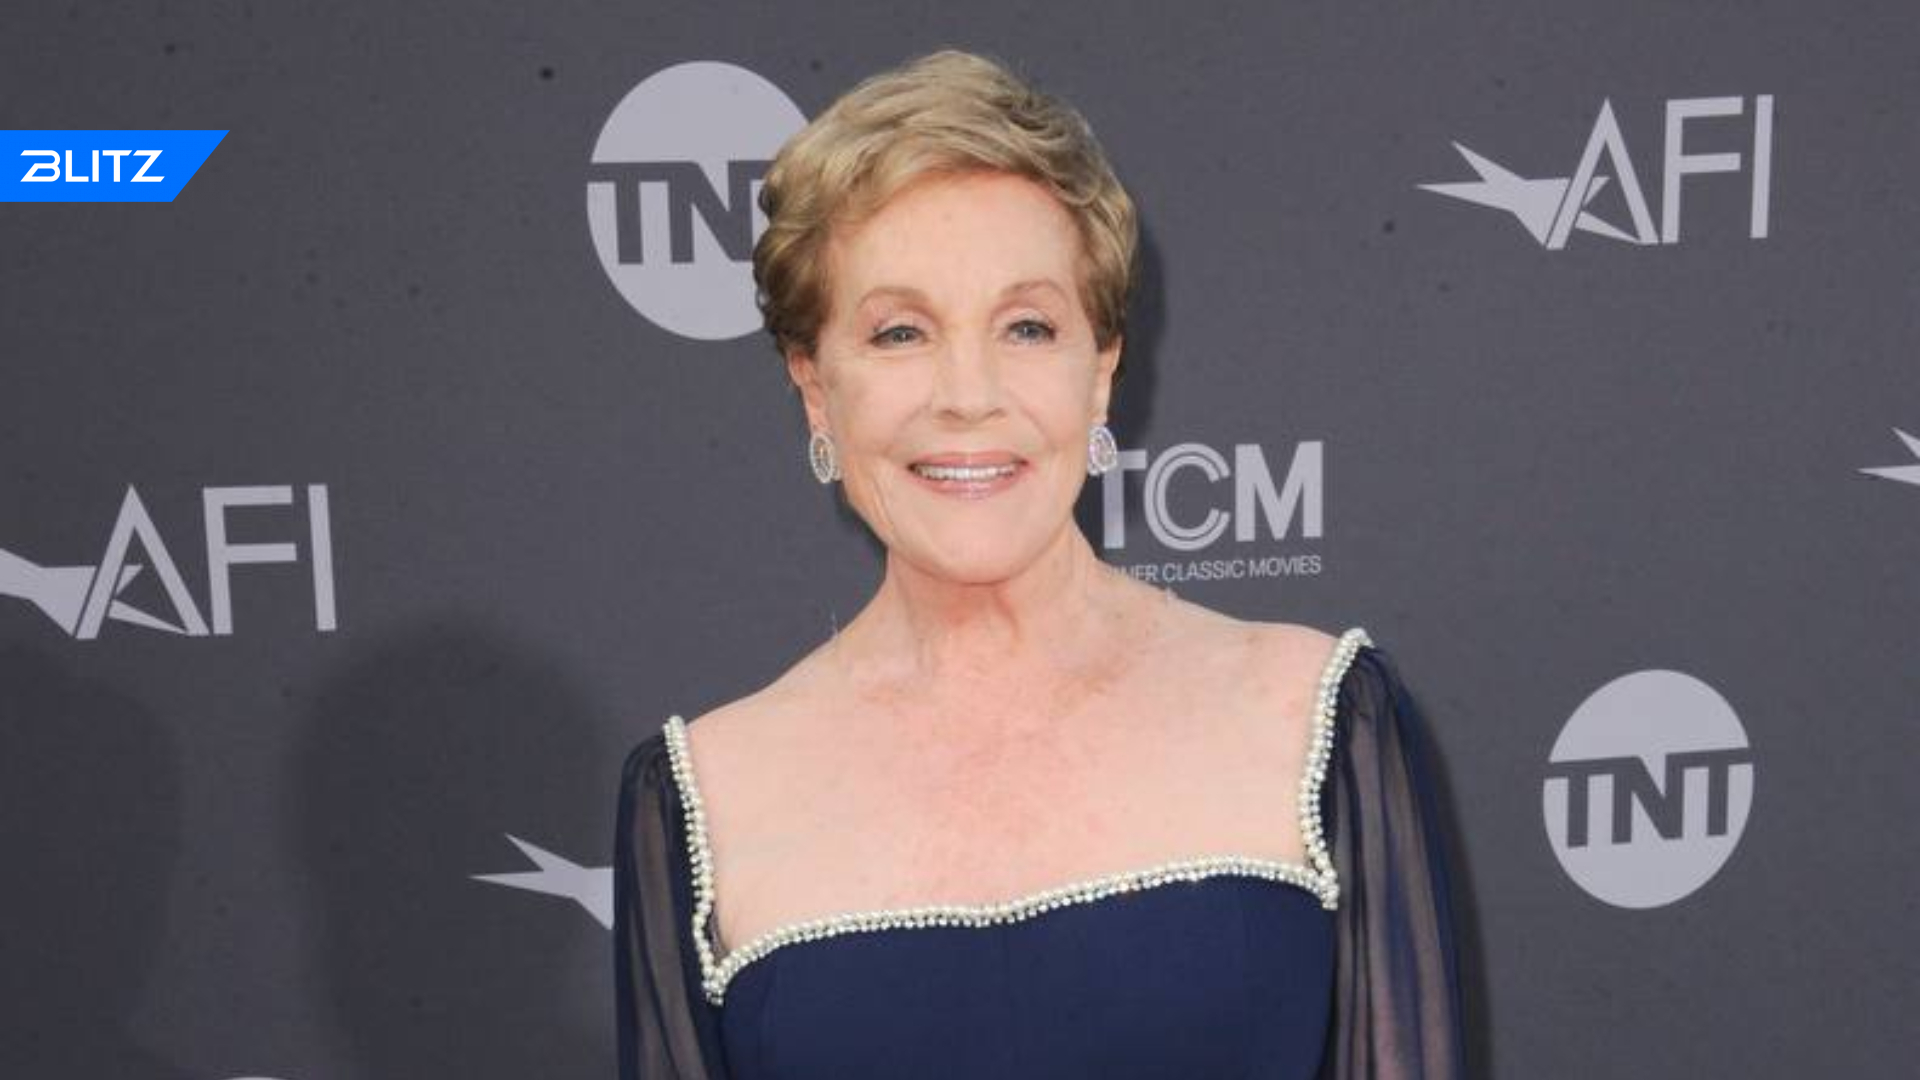 Julie Andrews Felt like She ‘Lost’ Her ‘Identity’ after Losing Ability ...